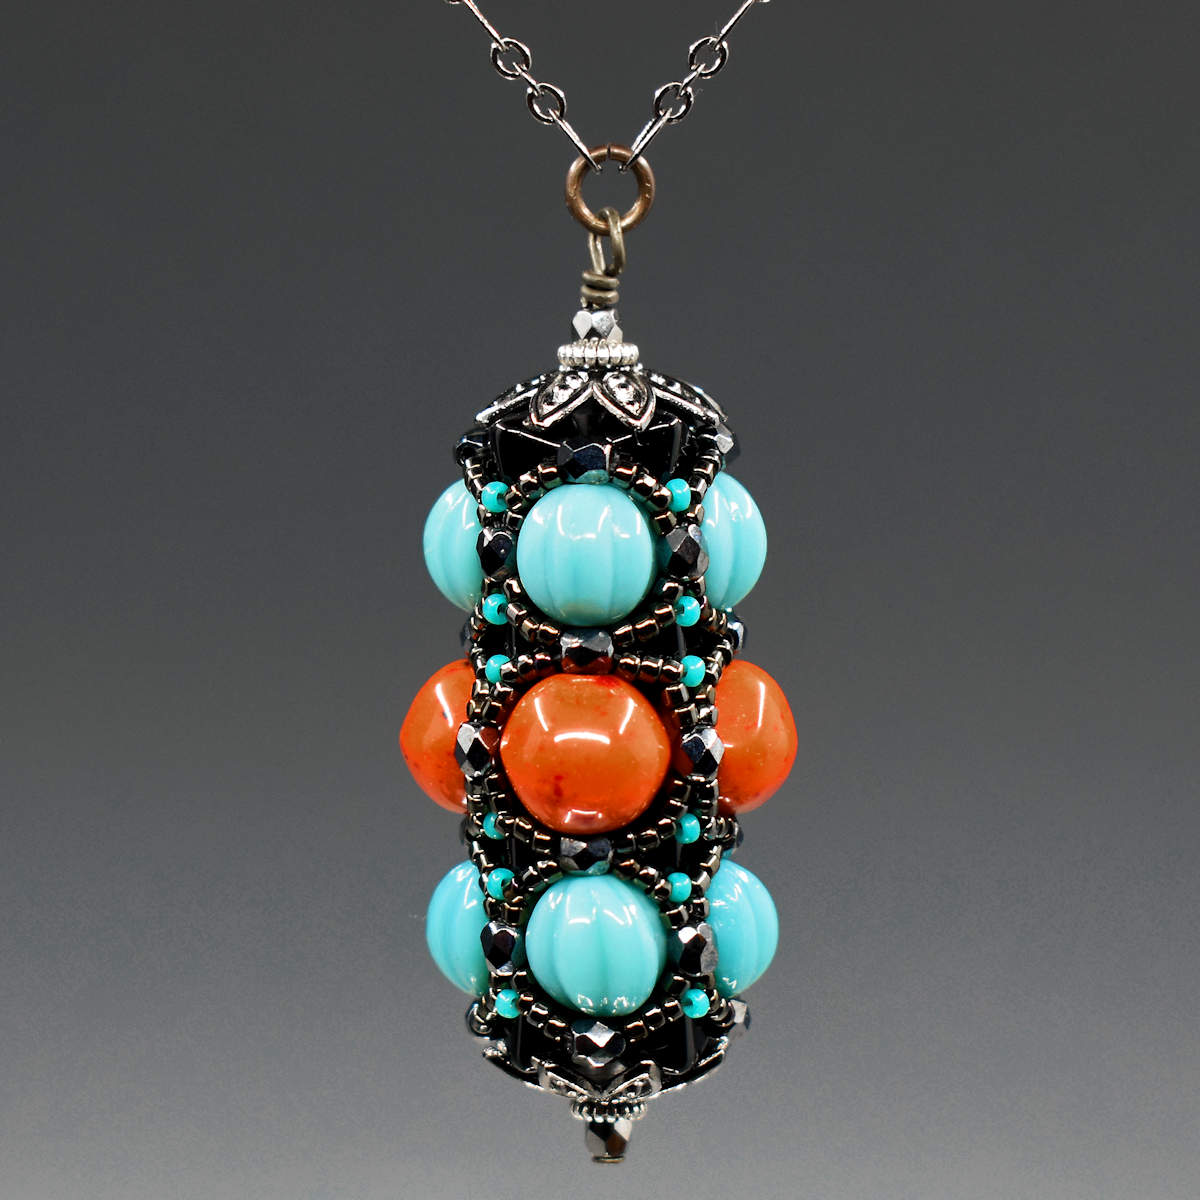 A turquoise and coral pendant on gunmetal chain hangs in front of a gray background. This pendant has turquoise outer rows and a coral red center row, all surrounded by a netting of black and gunmetal seed beads. 